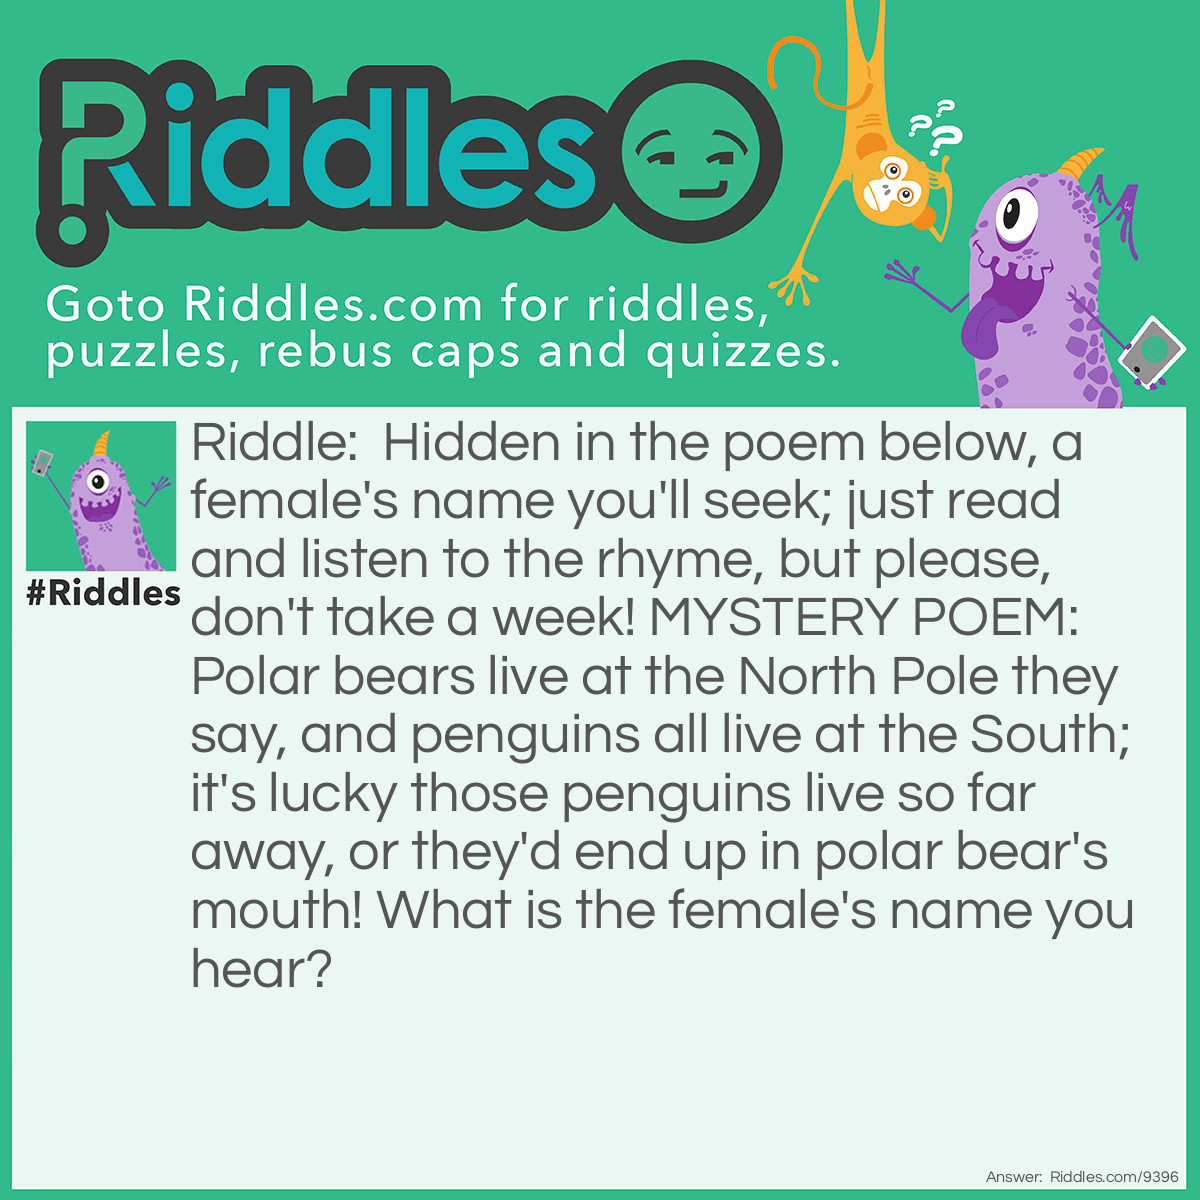 Riddle: Hidden in the poem below, a female's name you'll seek; just read and listen to the rhyme, but please, don't take a week! MYSTERY POEM: Polar bears live at the North Pole they say, and penguins all live at the South; it's lucky those penguins live so far away, or they'd end up in polar bear's mouth! What is the female's name you hear? Answer: OLIVE.